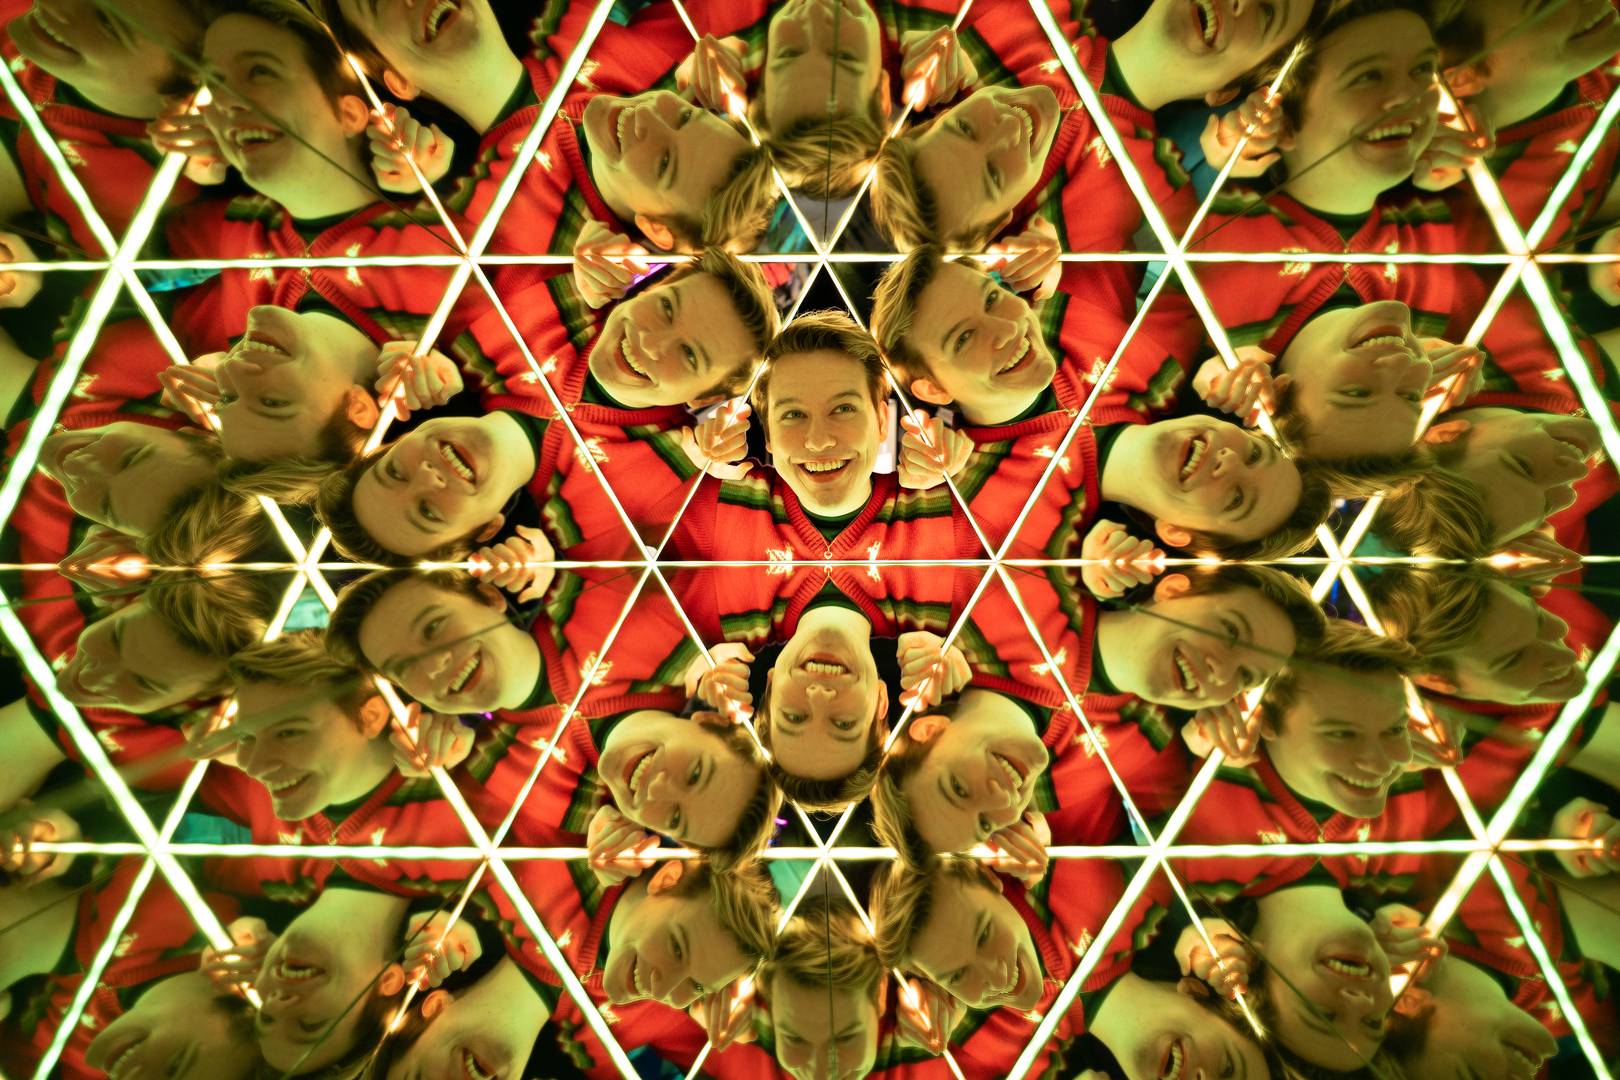 A boys face reflected many times, in the Kaleidohead exhibit at Camera Obscura & World of Illusions, Edinburgh,© Camera Obscura & World of Illusions, Edinburgh